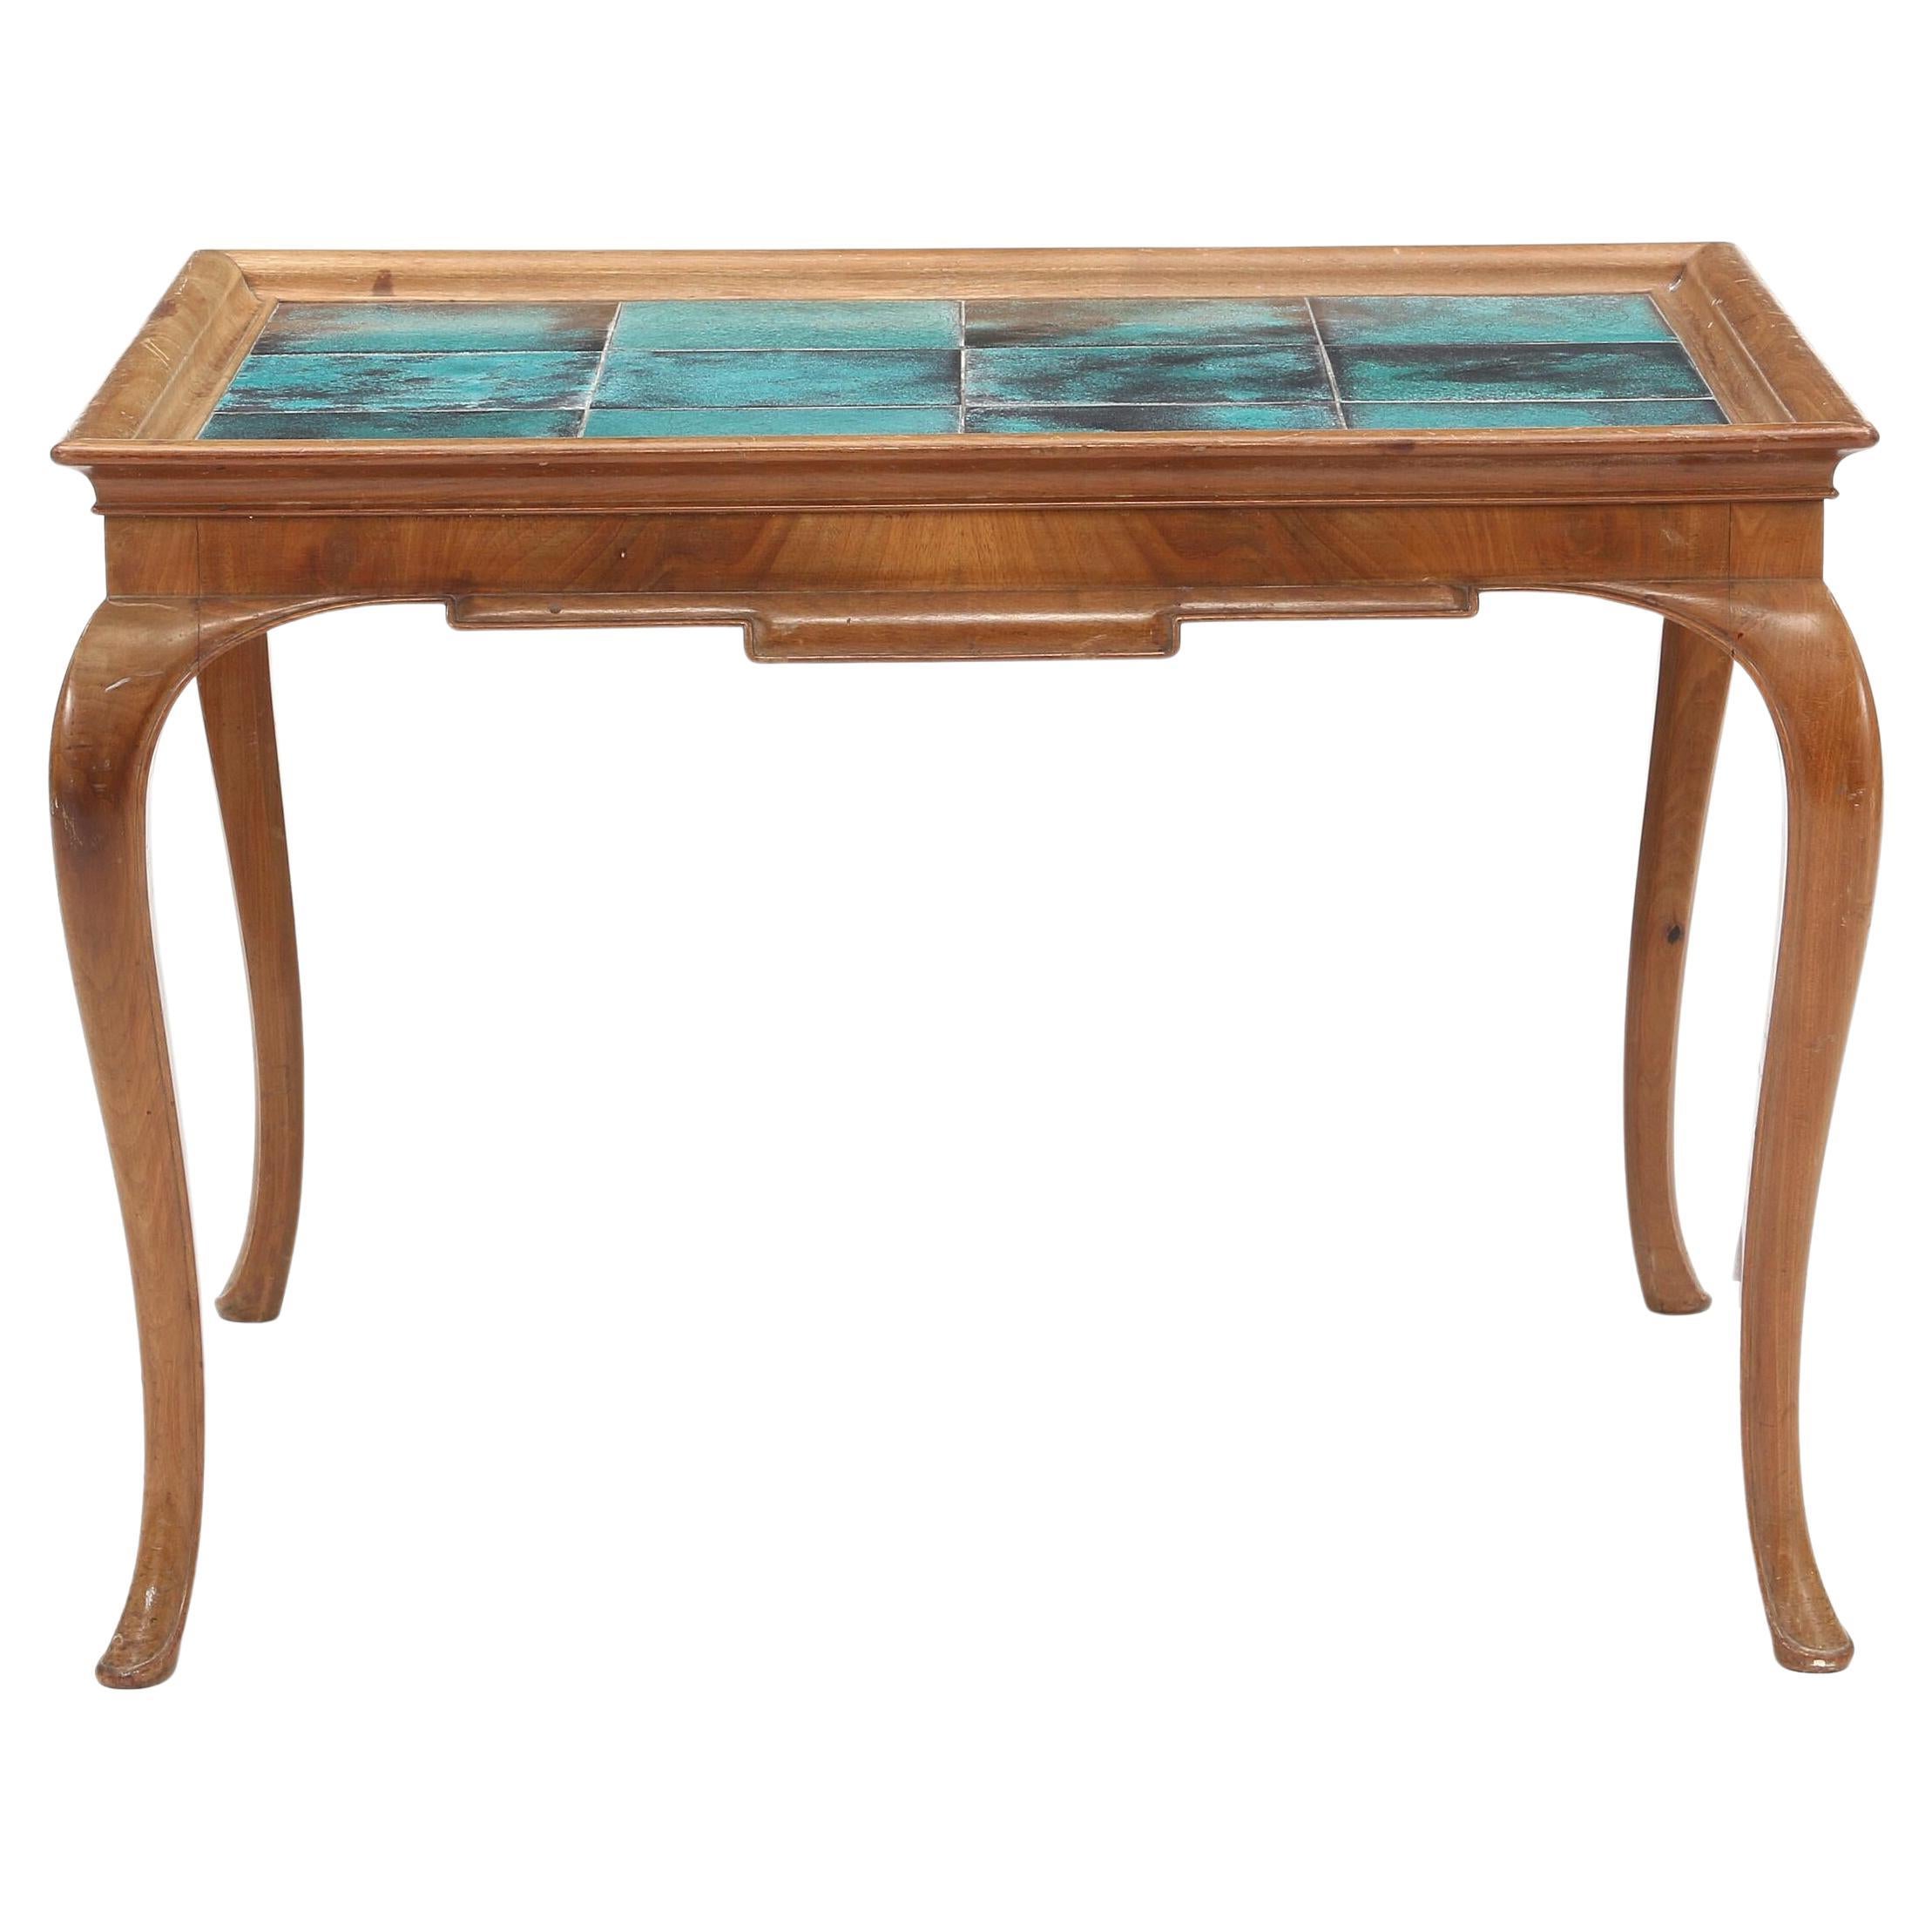 Frits Henningsen Mahogany Coffee Table Top Inlaid with Jens Thirslund Tiles 1930